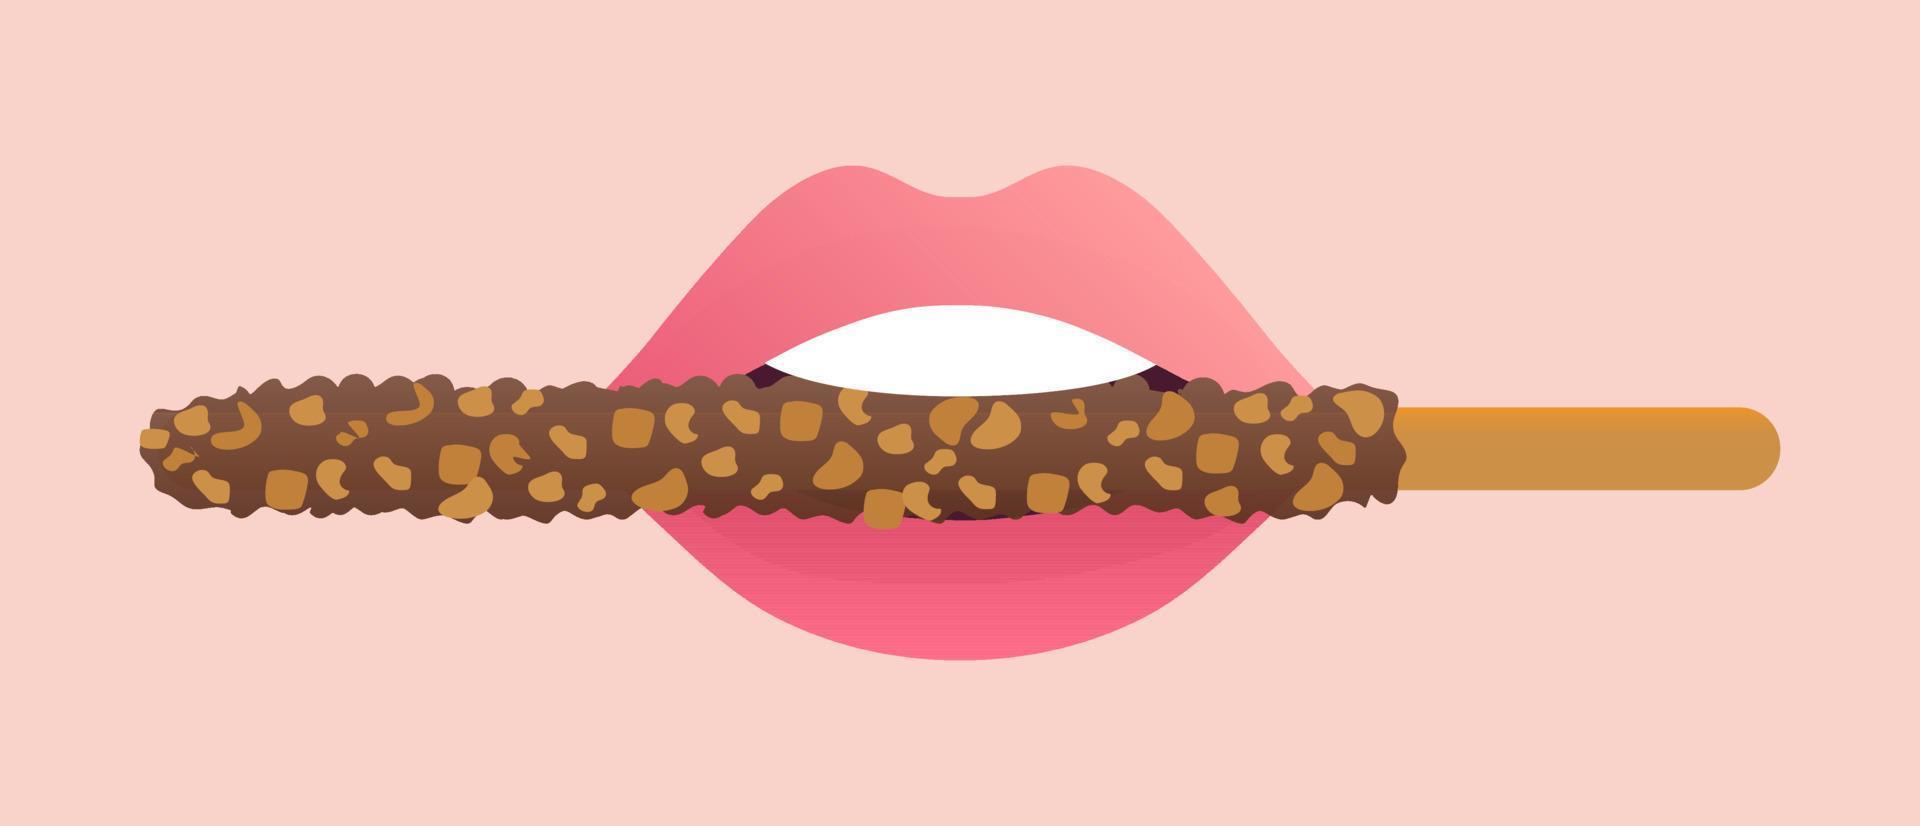 Chocolate dipped pepero stick in pink lips vector illustration